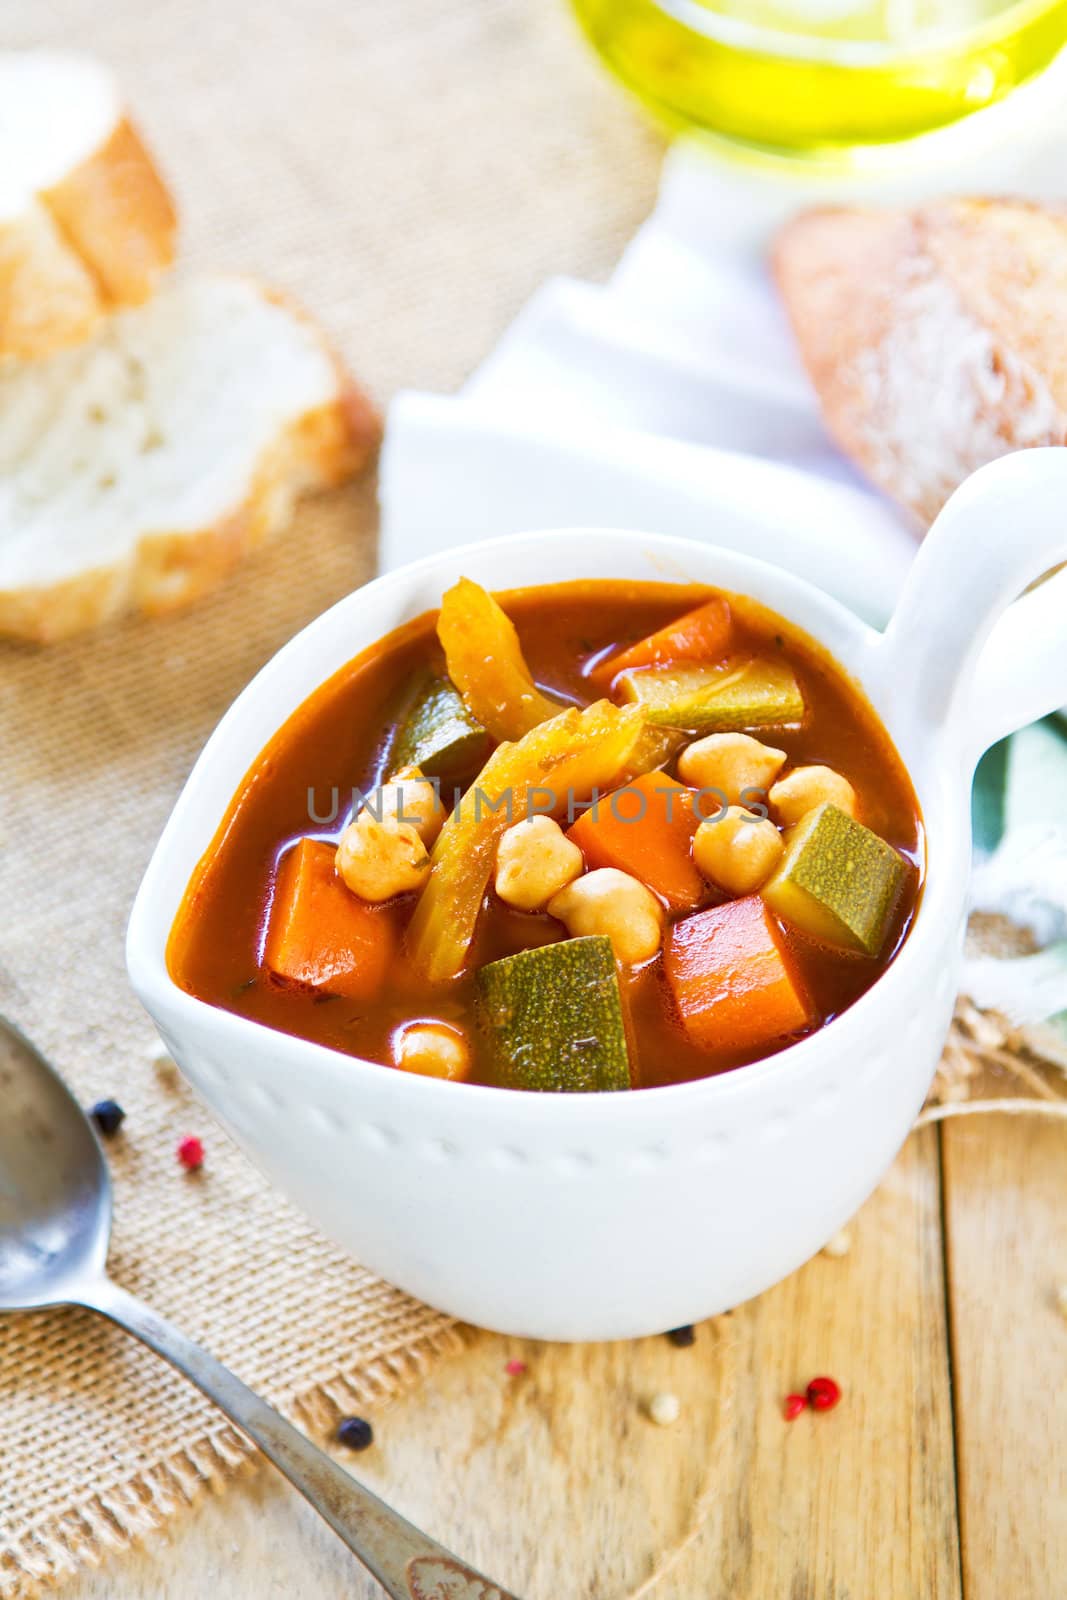 Vegetables with Chickpea soup by loaf of bread